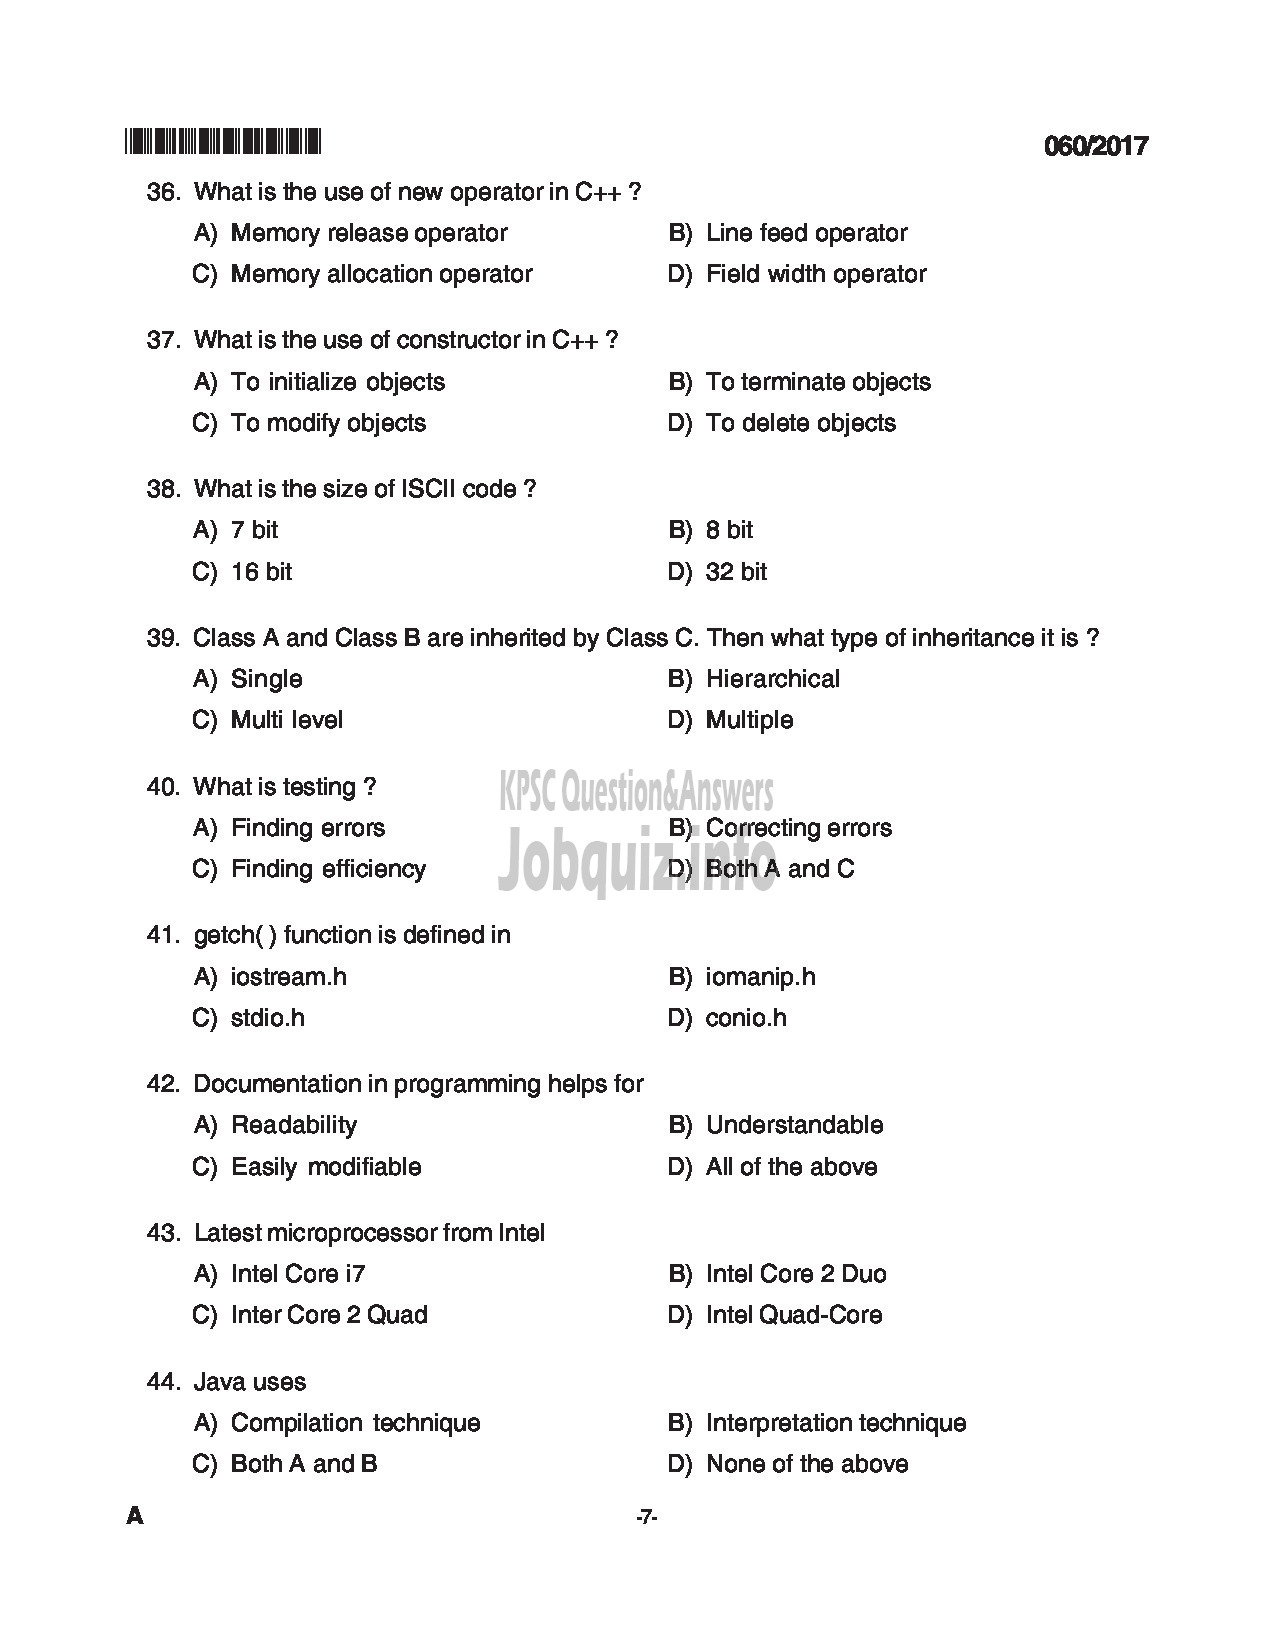 Kerala PSC Question Paper - TRADESMAN COMPUTER ENGINEERING TECHNICAL EDUCATION QUESTION PAPER-7